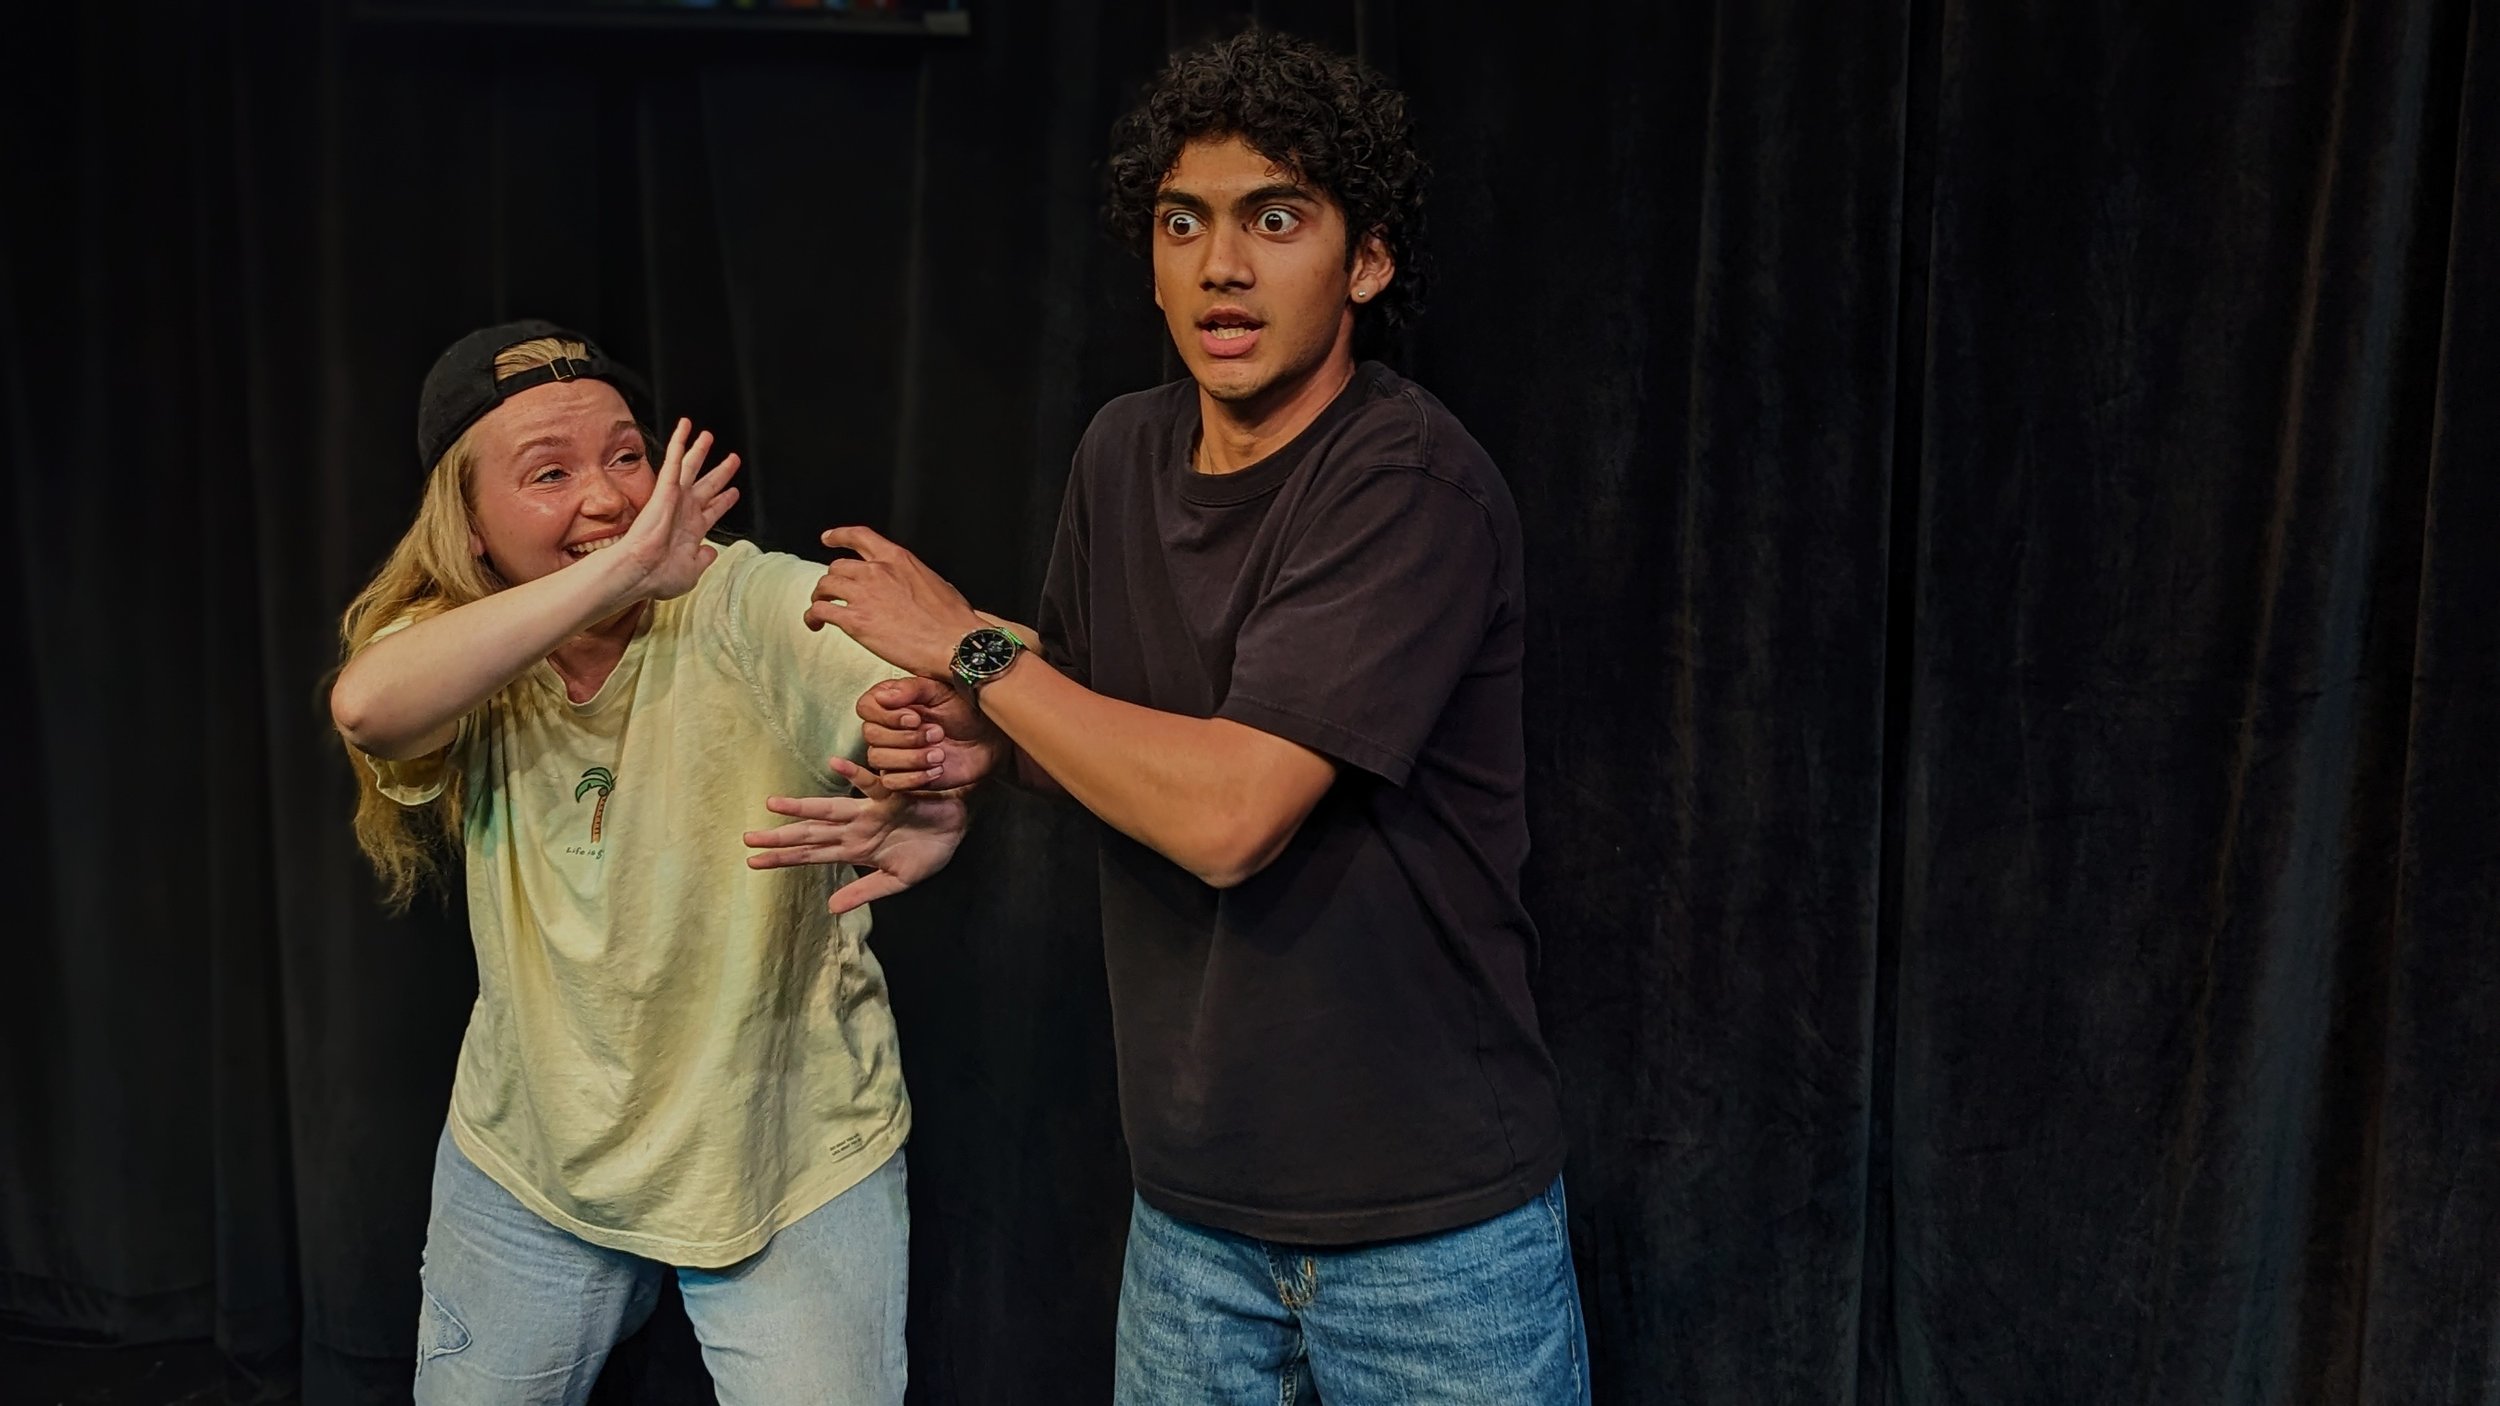  L-R: Lizzie Izyumin and Arohan Desphande in ACCIDENTAL IMMORTAL by Sophia Naylor. 